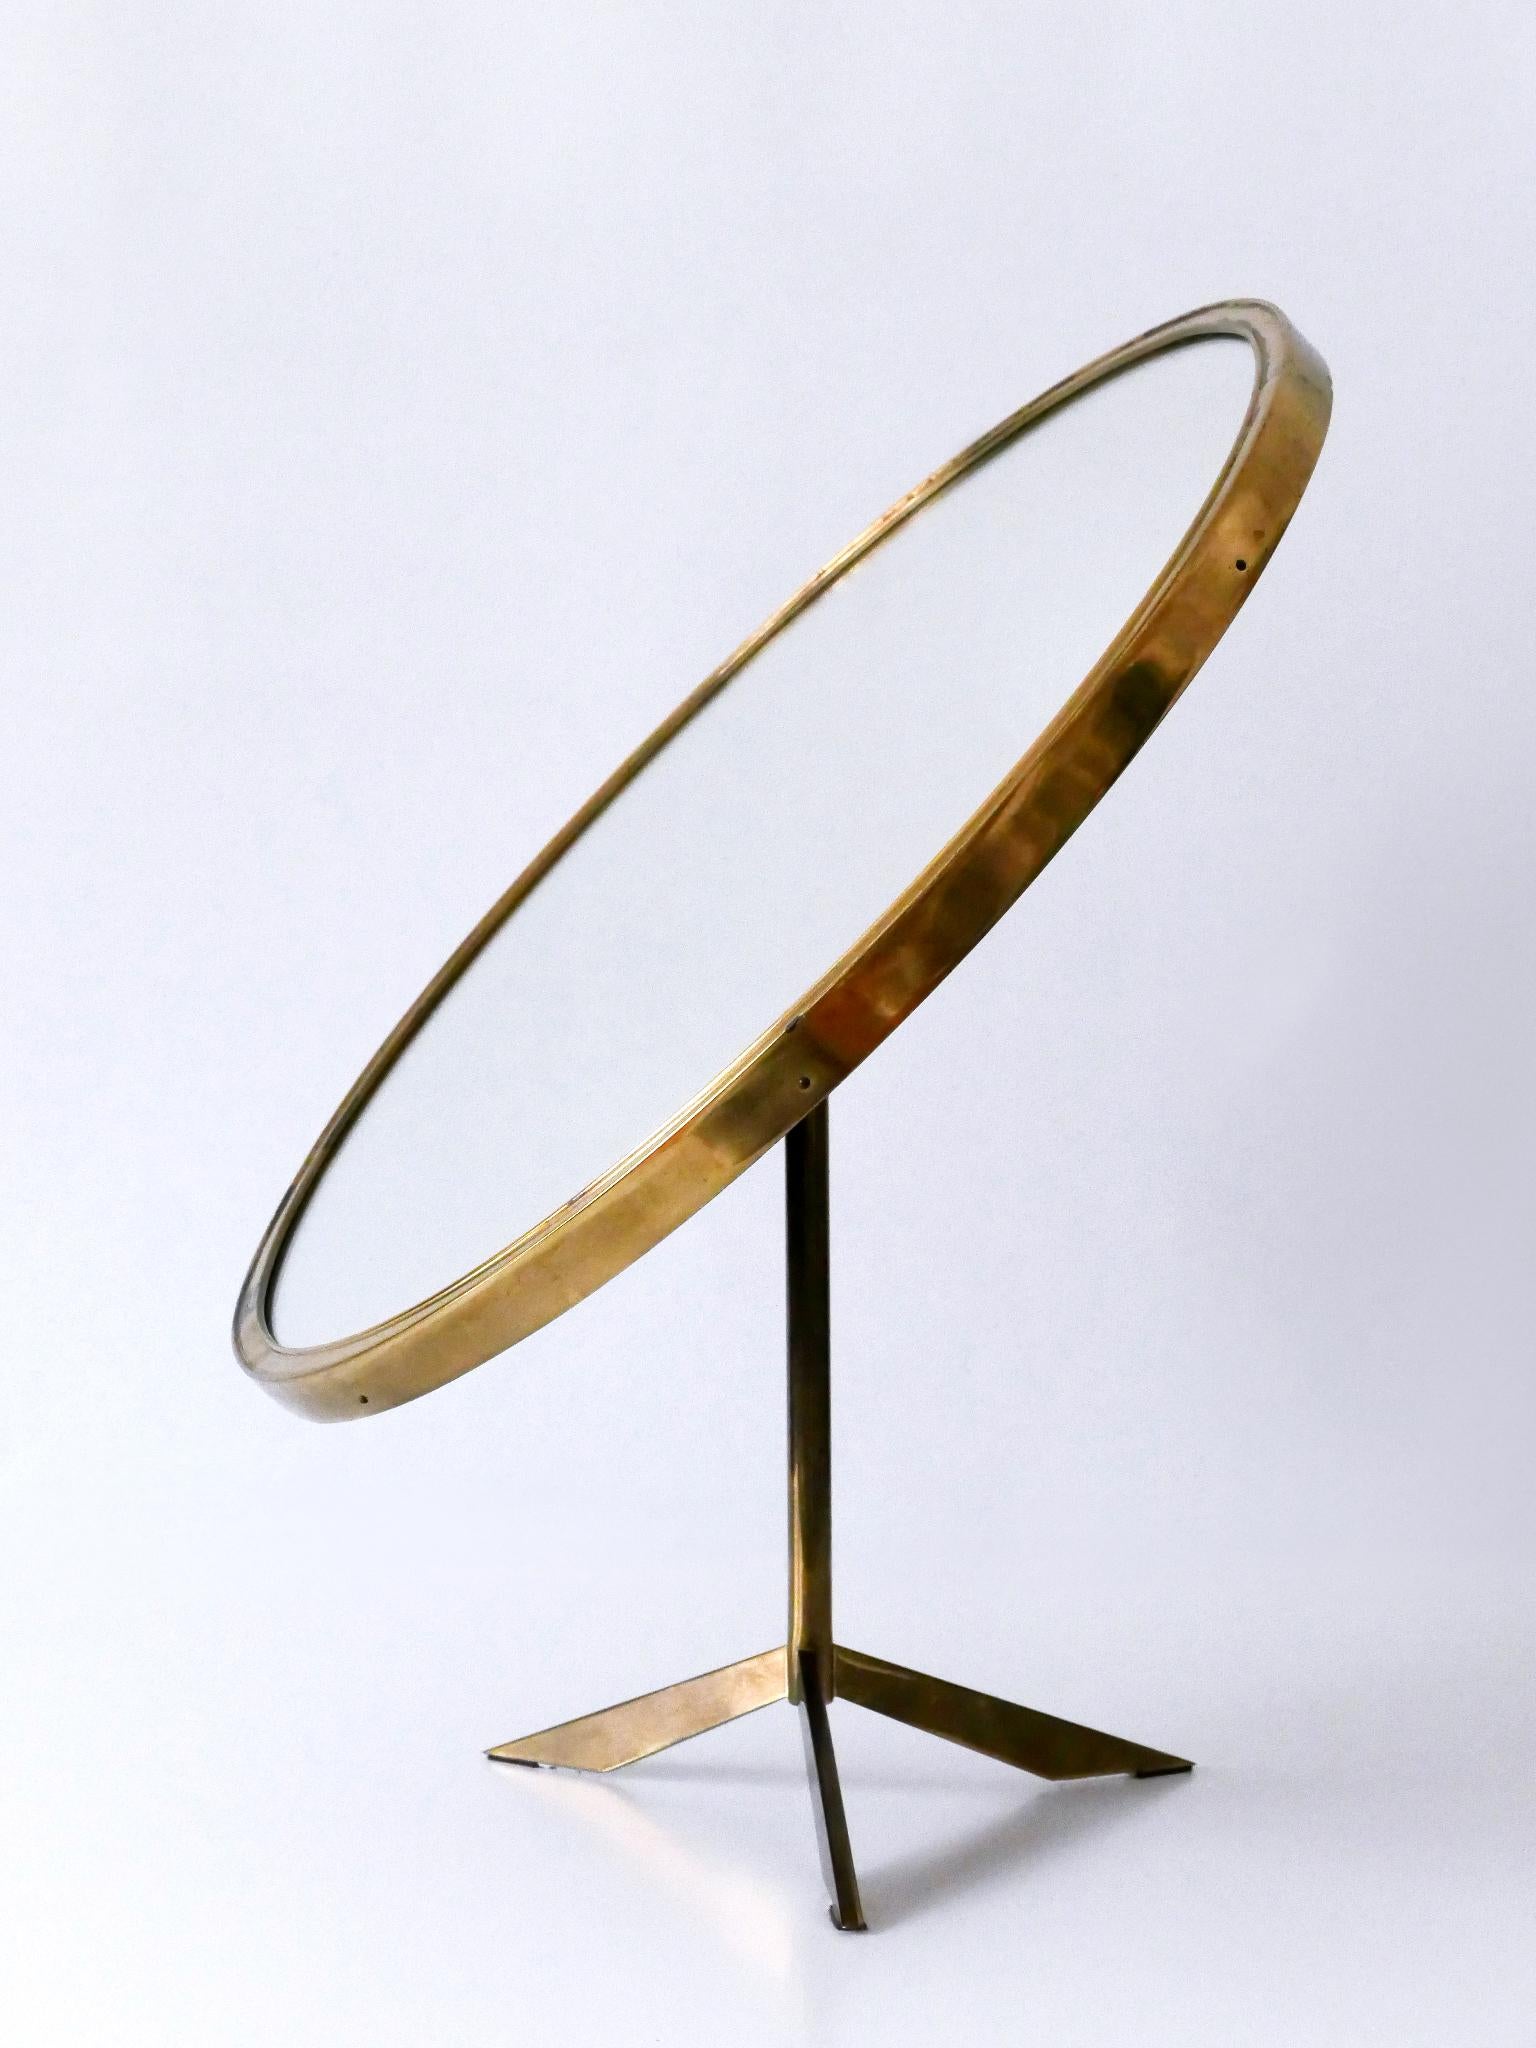 Elegant Mid-Century Modern Wall or Vanity Mirror by Zierform Germany 1950s For Sale 12